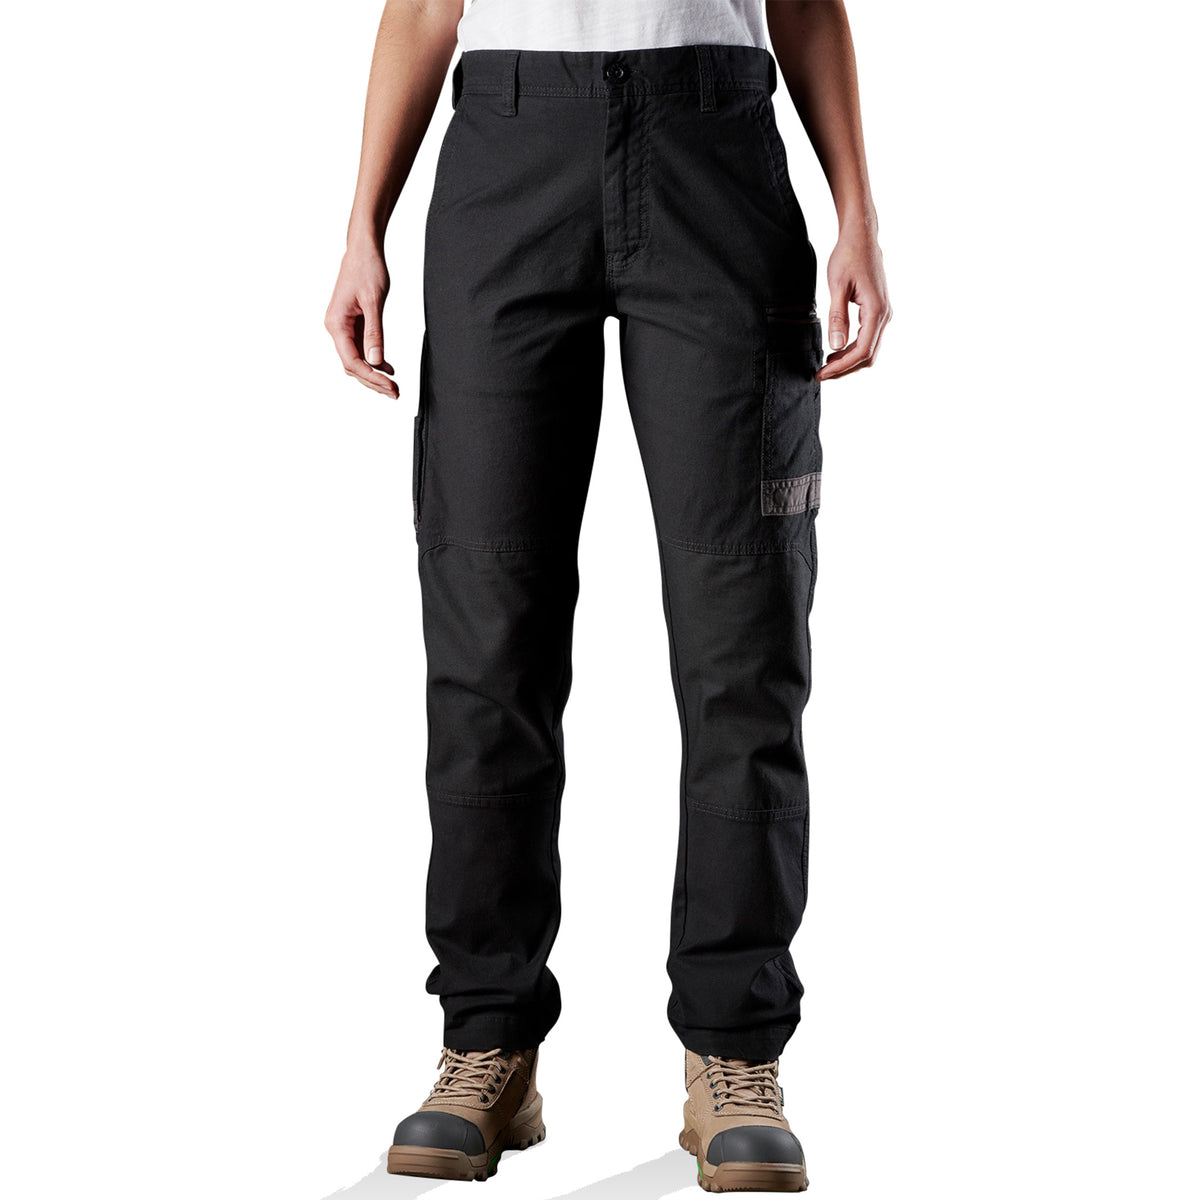 stretchy work pants for aussie tradies – Form WorkWear